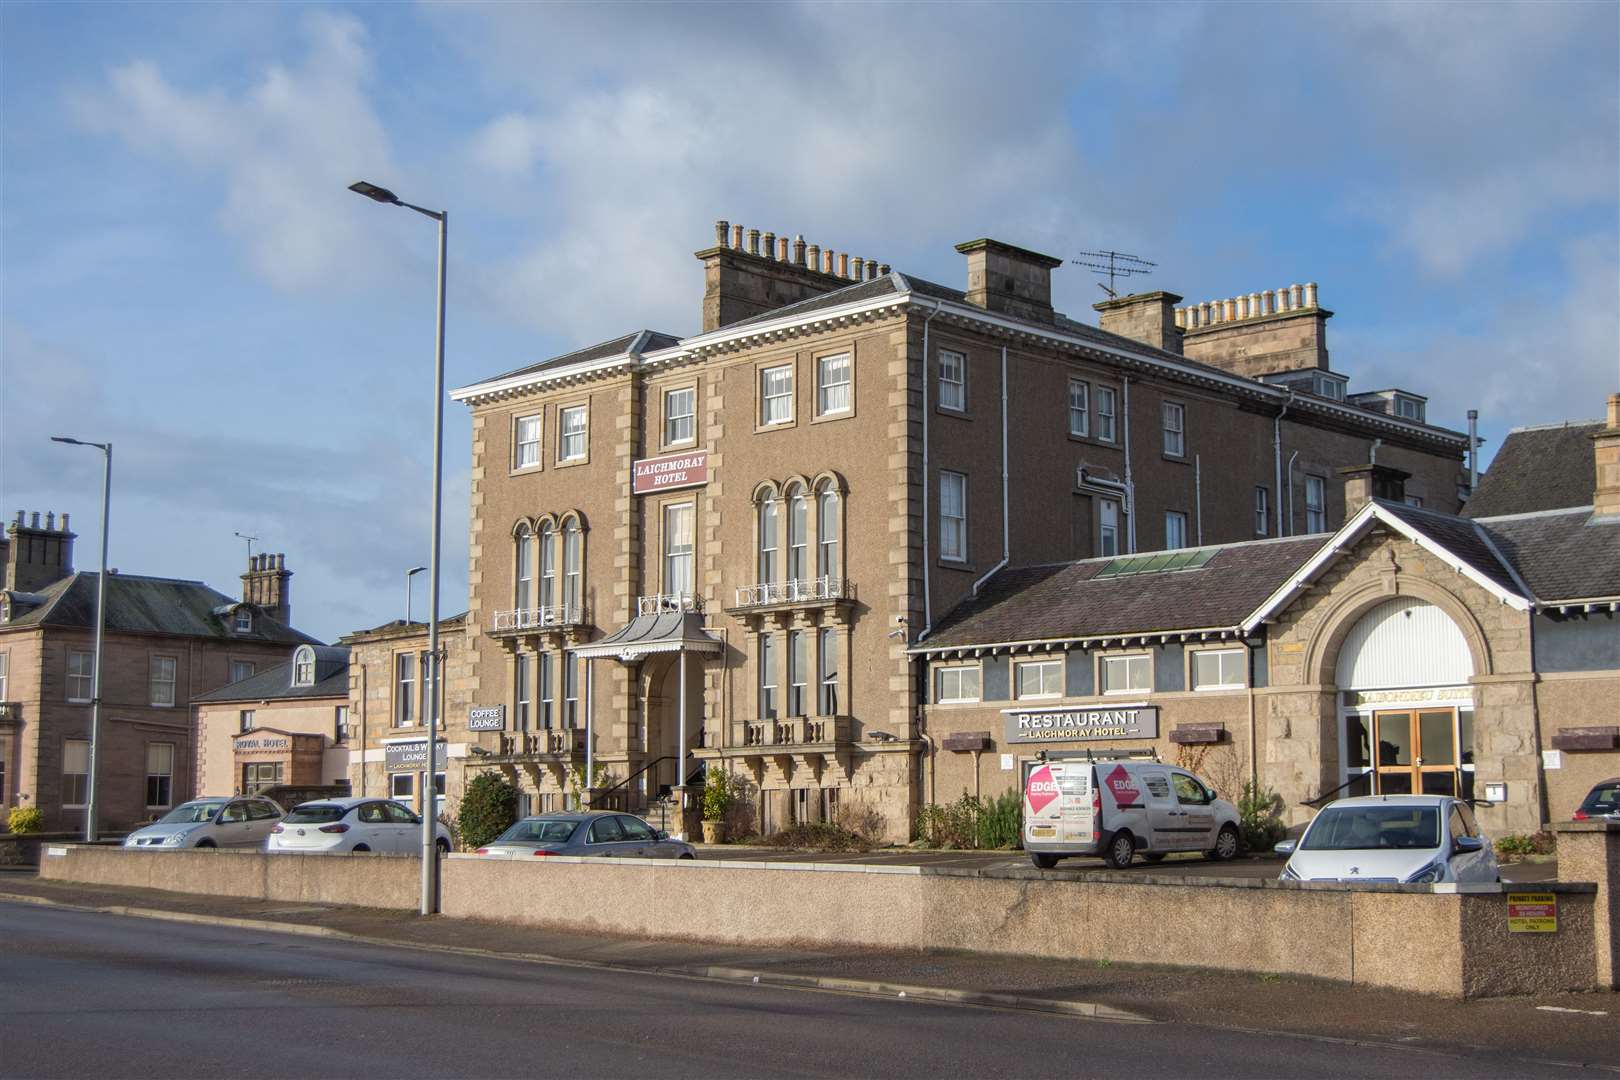 The meeting will take place at the Laichmoray Hotel in Elgin.